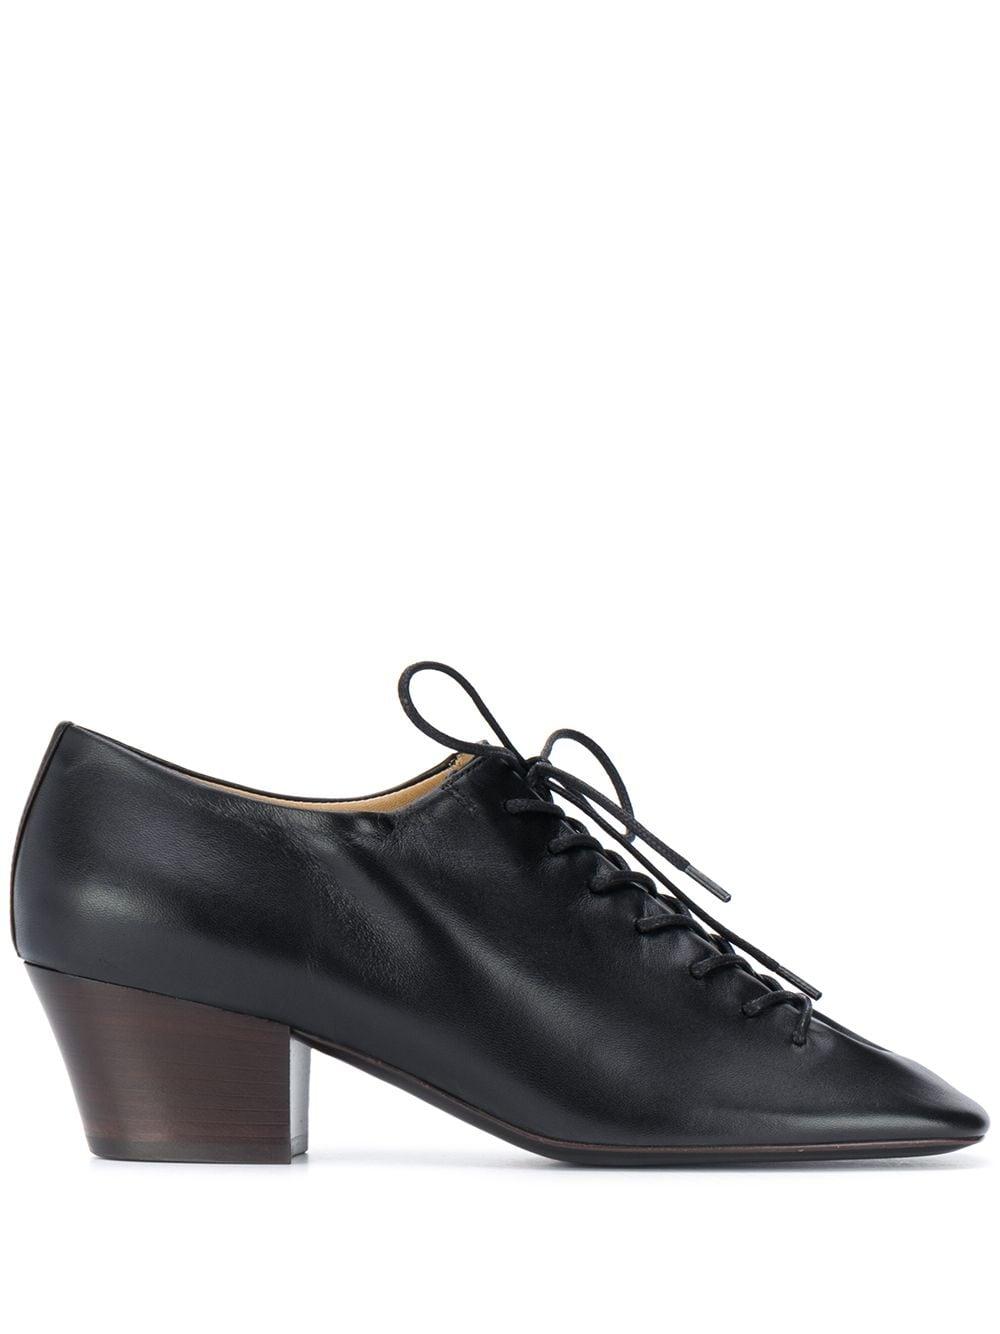 Lemaire Leather Square Toe Lace-up Shoes in Brown - Lyst